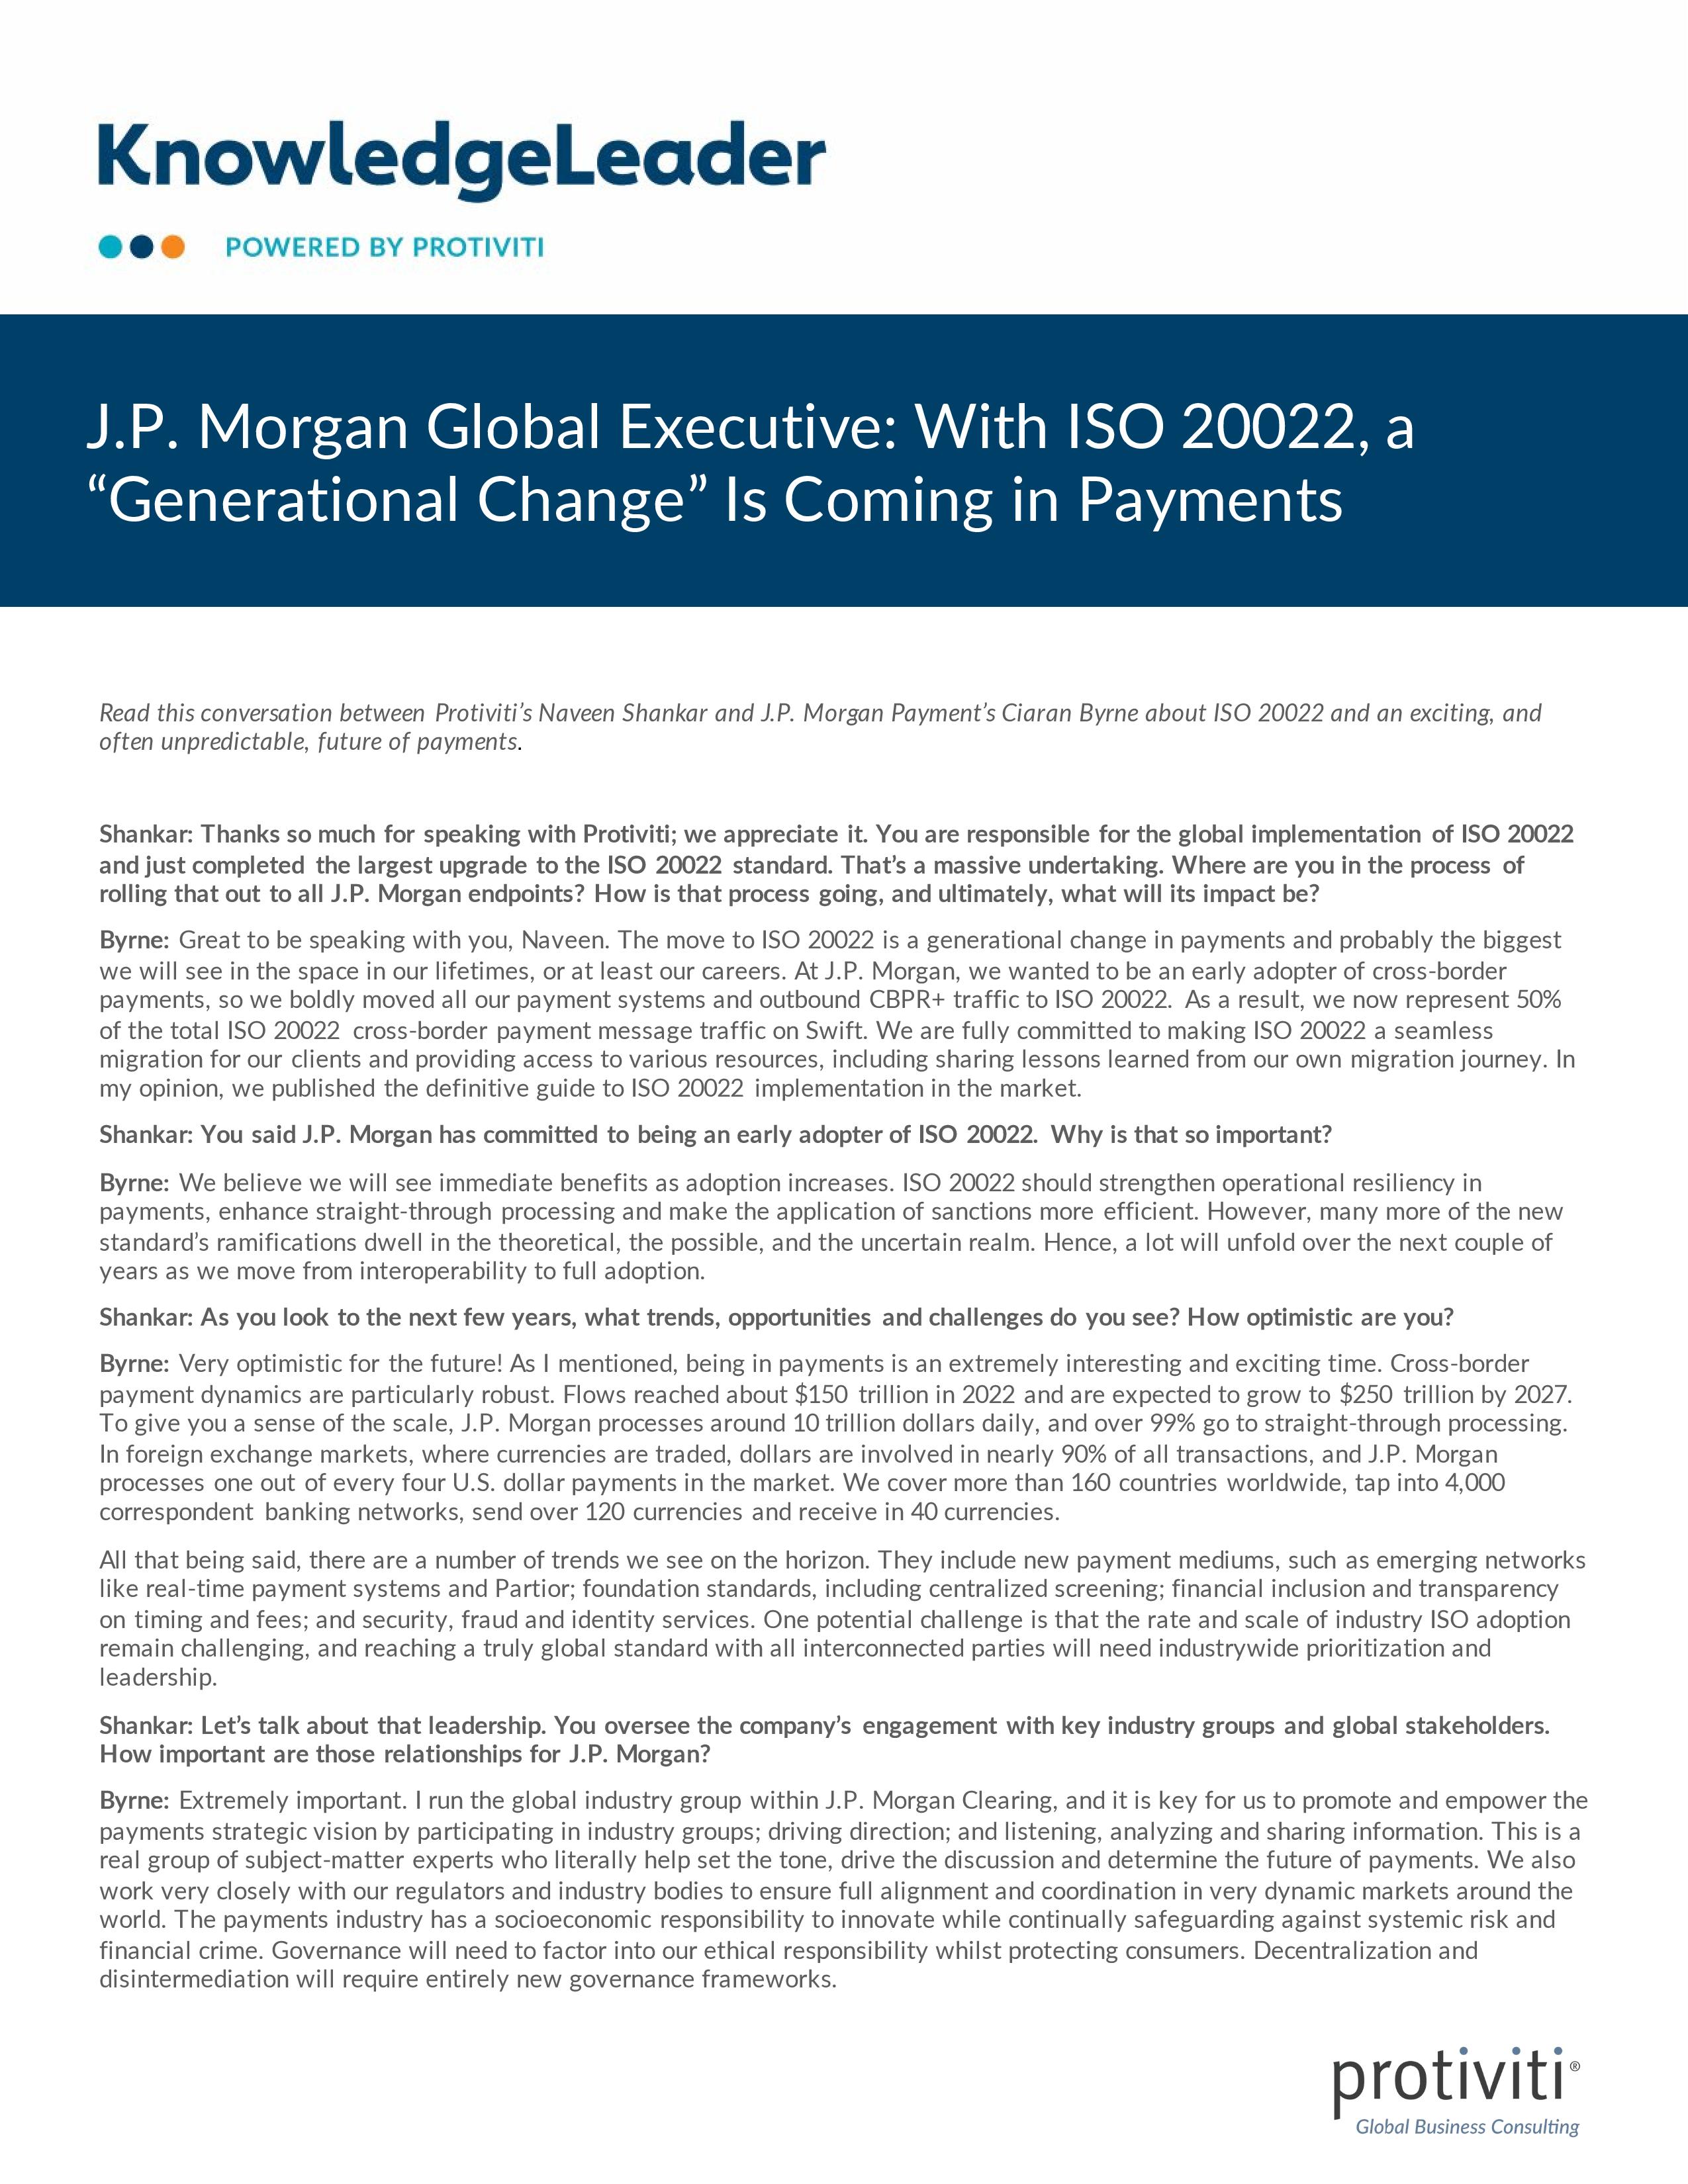 screenshot of the first page of J.P. Morgan Global Executive With ISO 20022, a “Generational Change” Is Coming in Payments